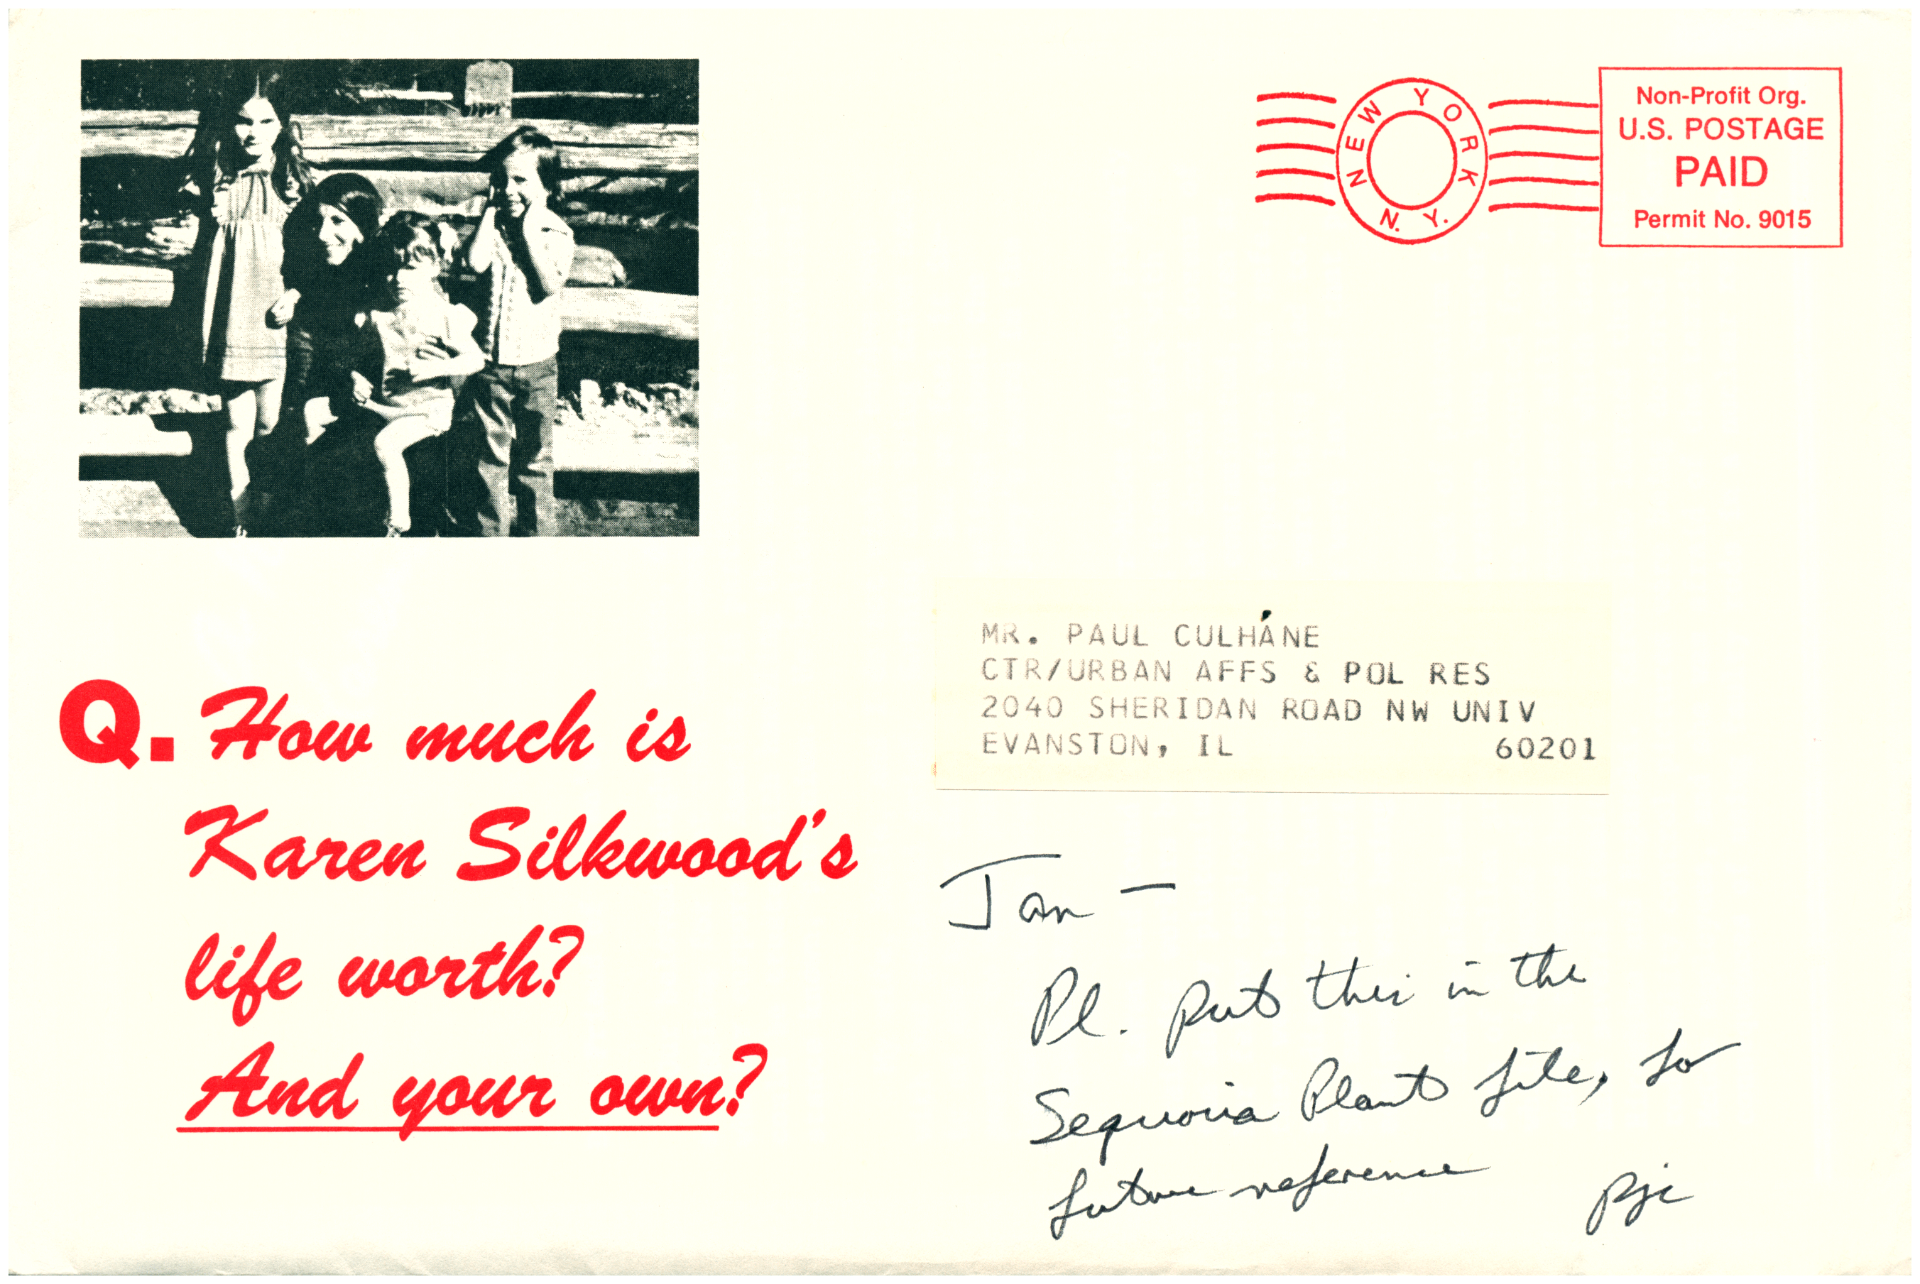 Envelope with address in upper right corner, picture of Karen Silkwood with children in the upper left corner and the text "How much is Karen Silkwood's life worth? And your own?"